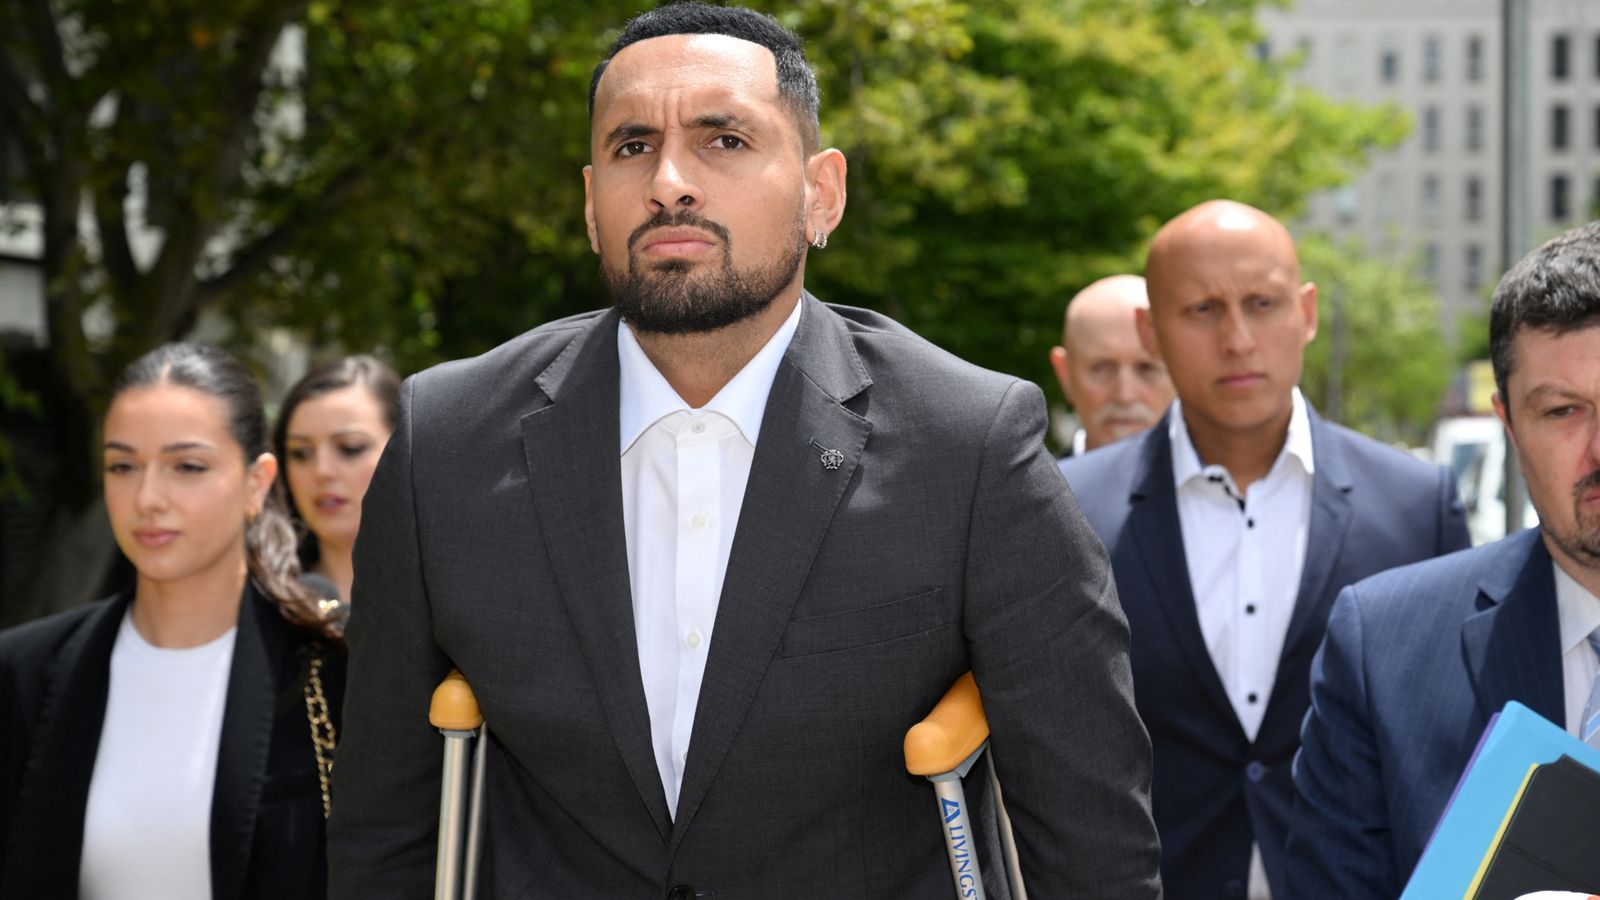 Nick Kyrgios avoids conviction after pleading guilty to assaulting ex-girlfriend